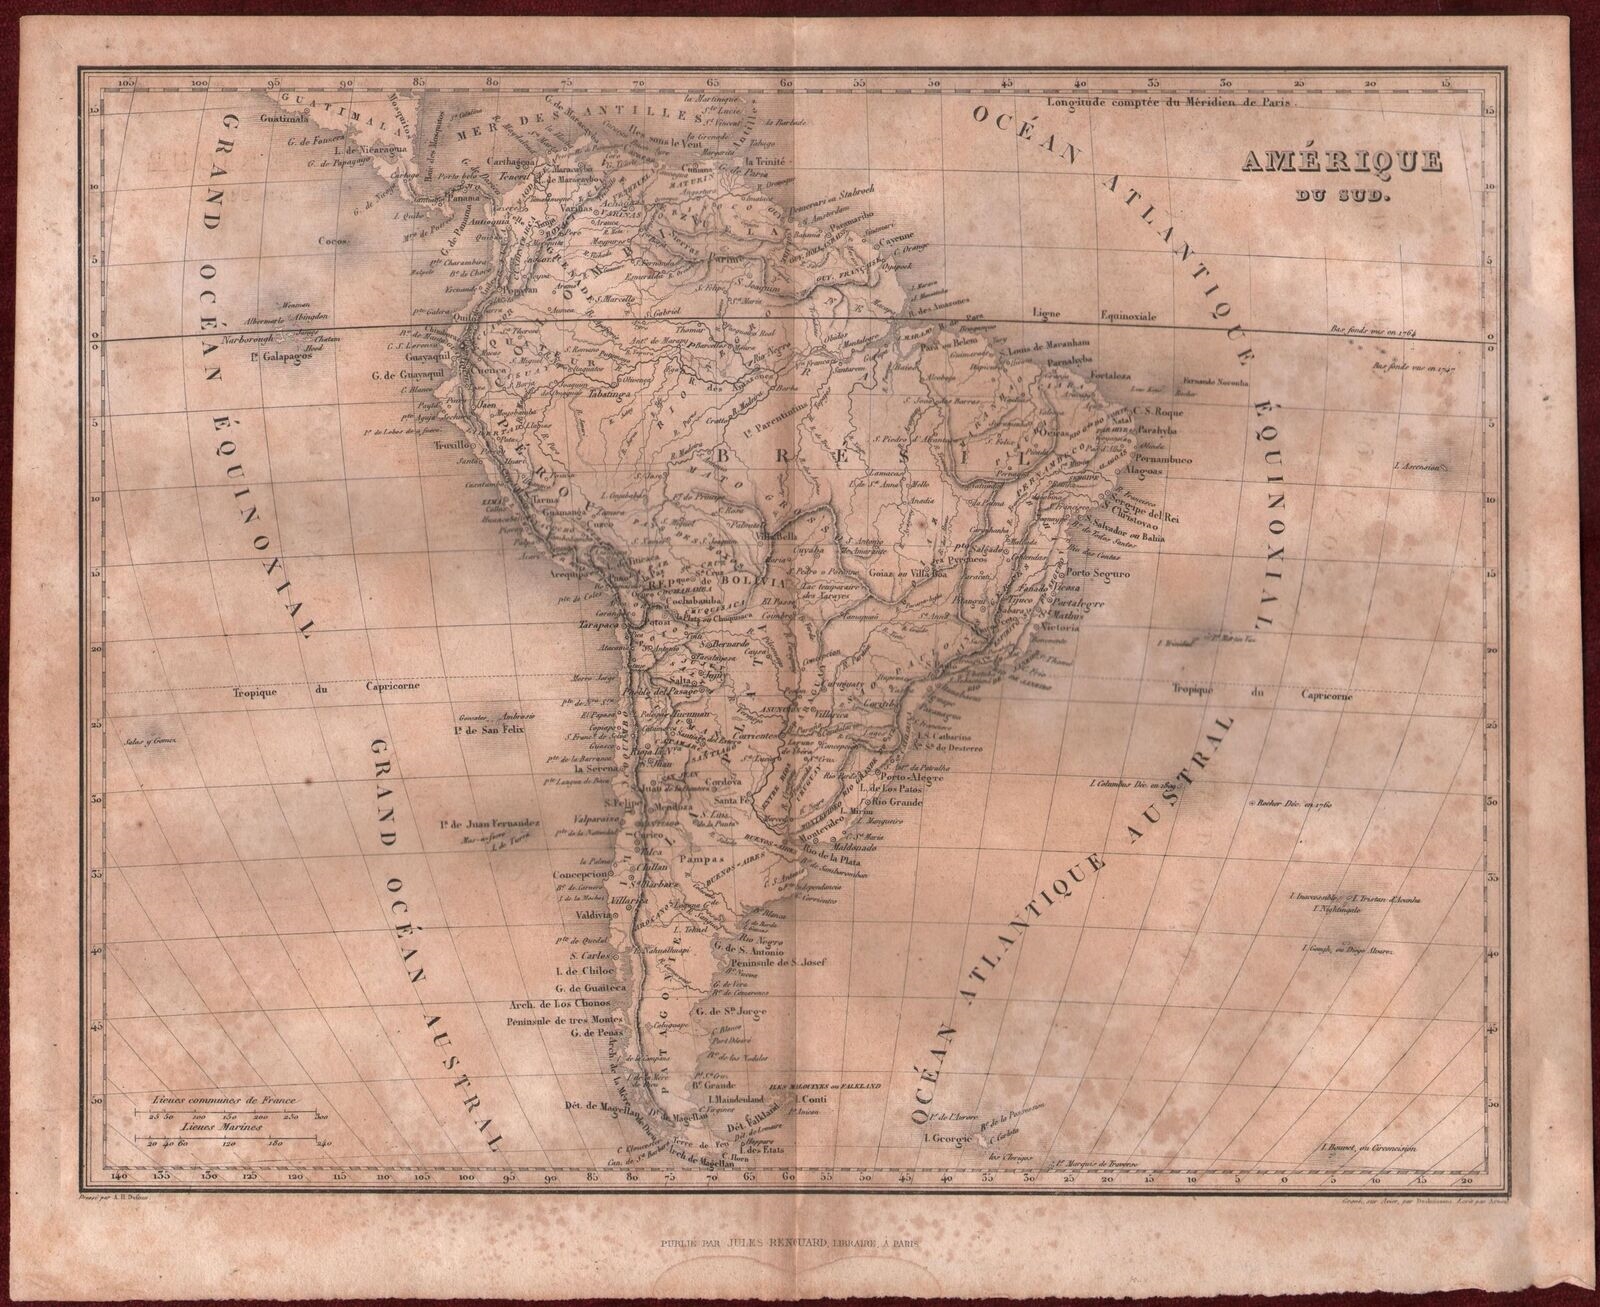 One of the maps printed by Jules Renouard